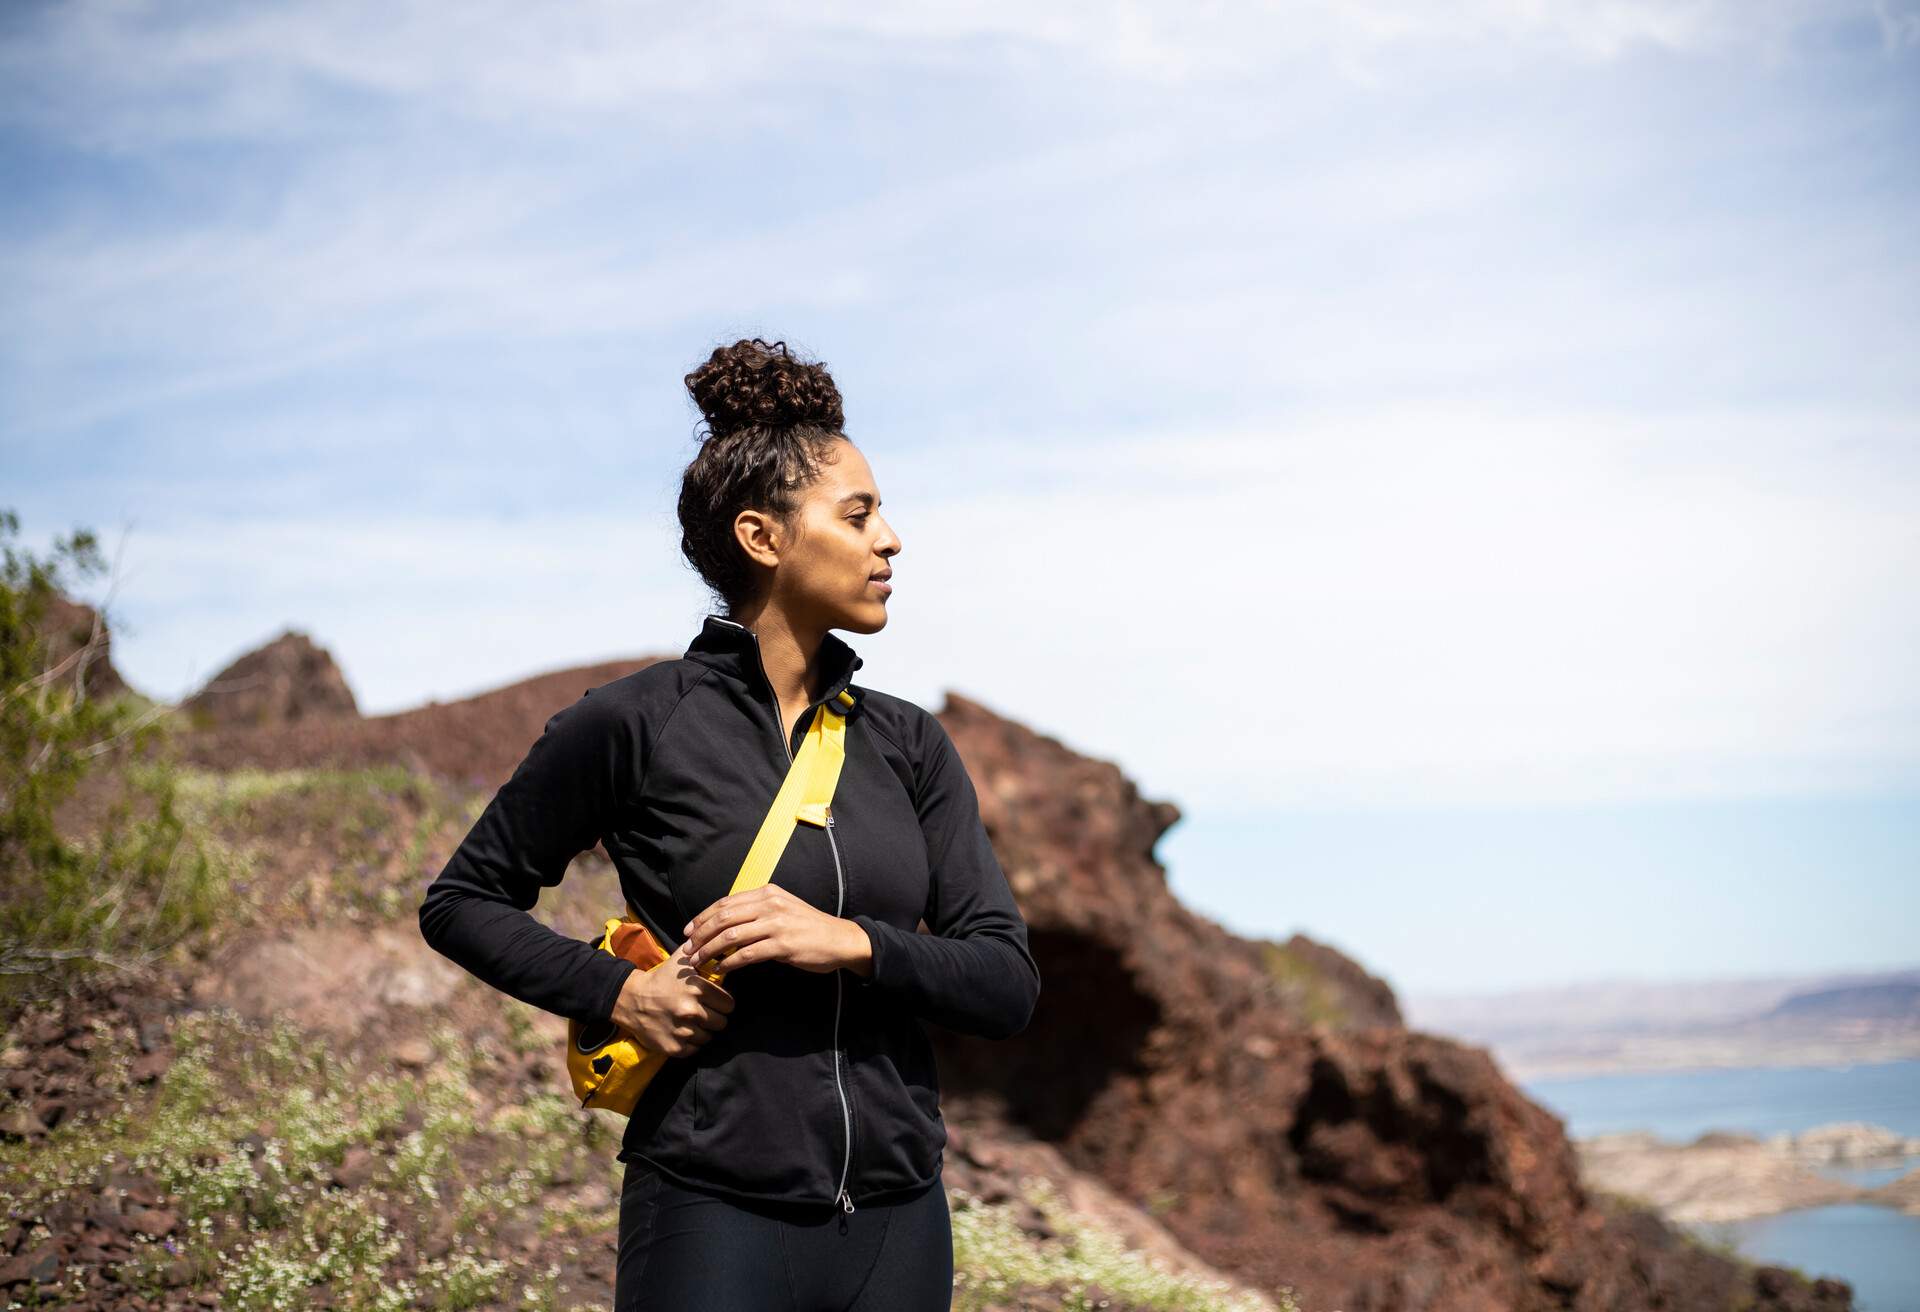 THEME_PEOPLE_WOMAN_HIKER_HIKING_GettyImages